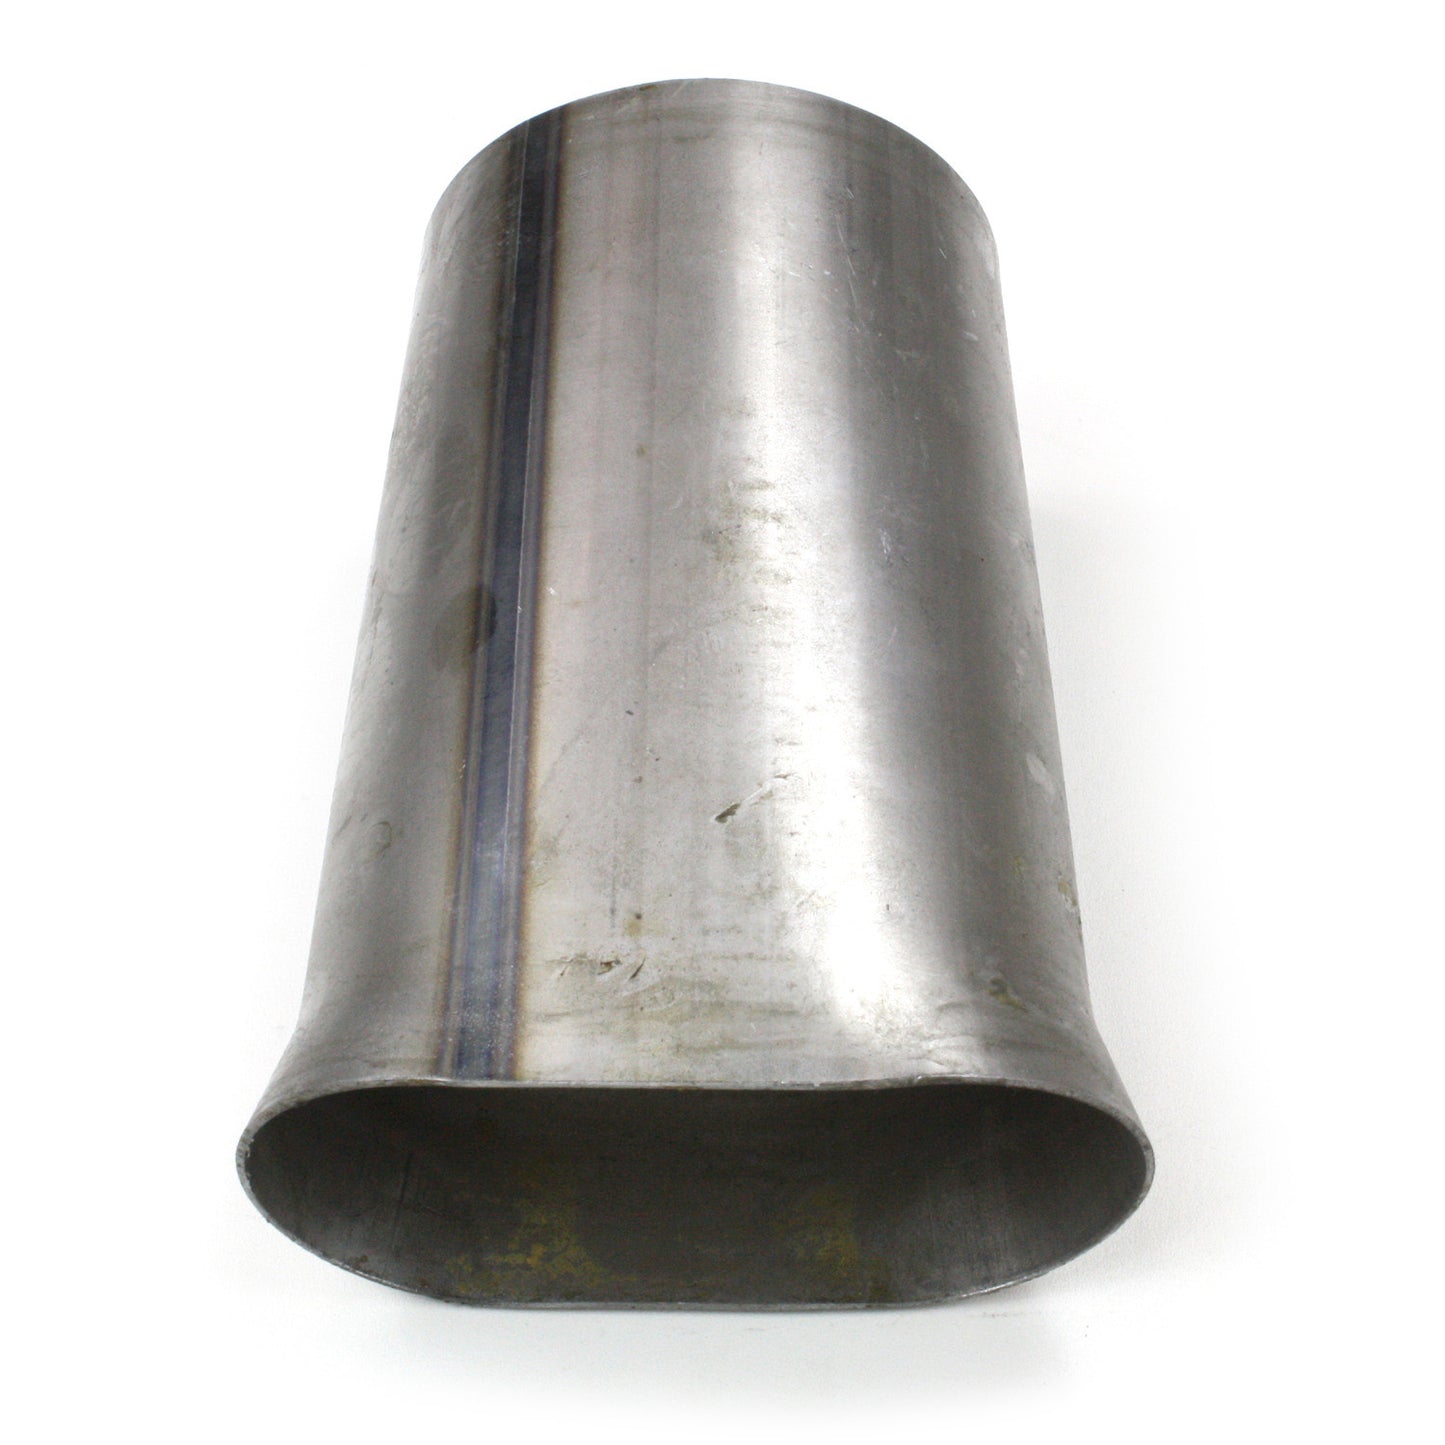 Patriot Exhaust H7666 2-1 Formed Collector 2 1/2"x3 1/2"x6 1/2"